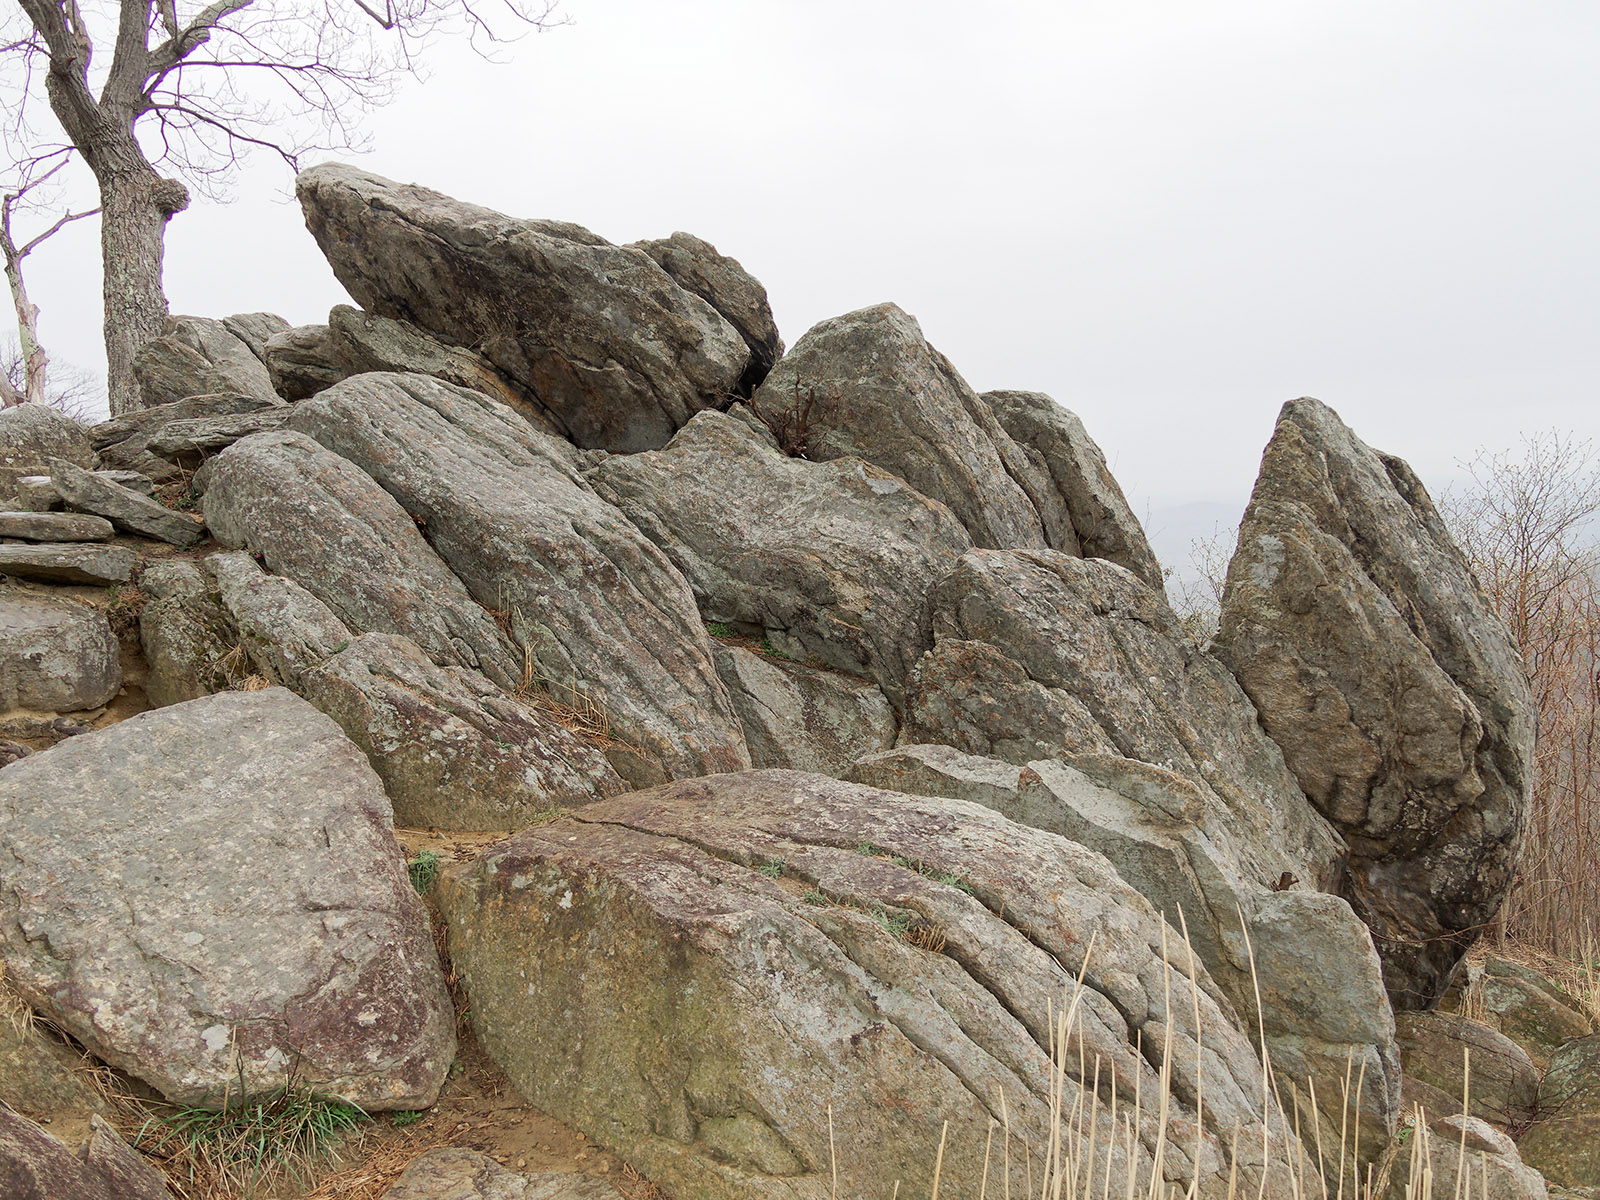 Highly weathered granite gneiss at Hazel Mountain Overlook.